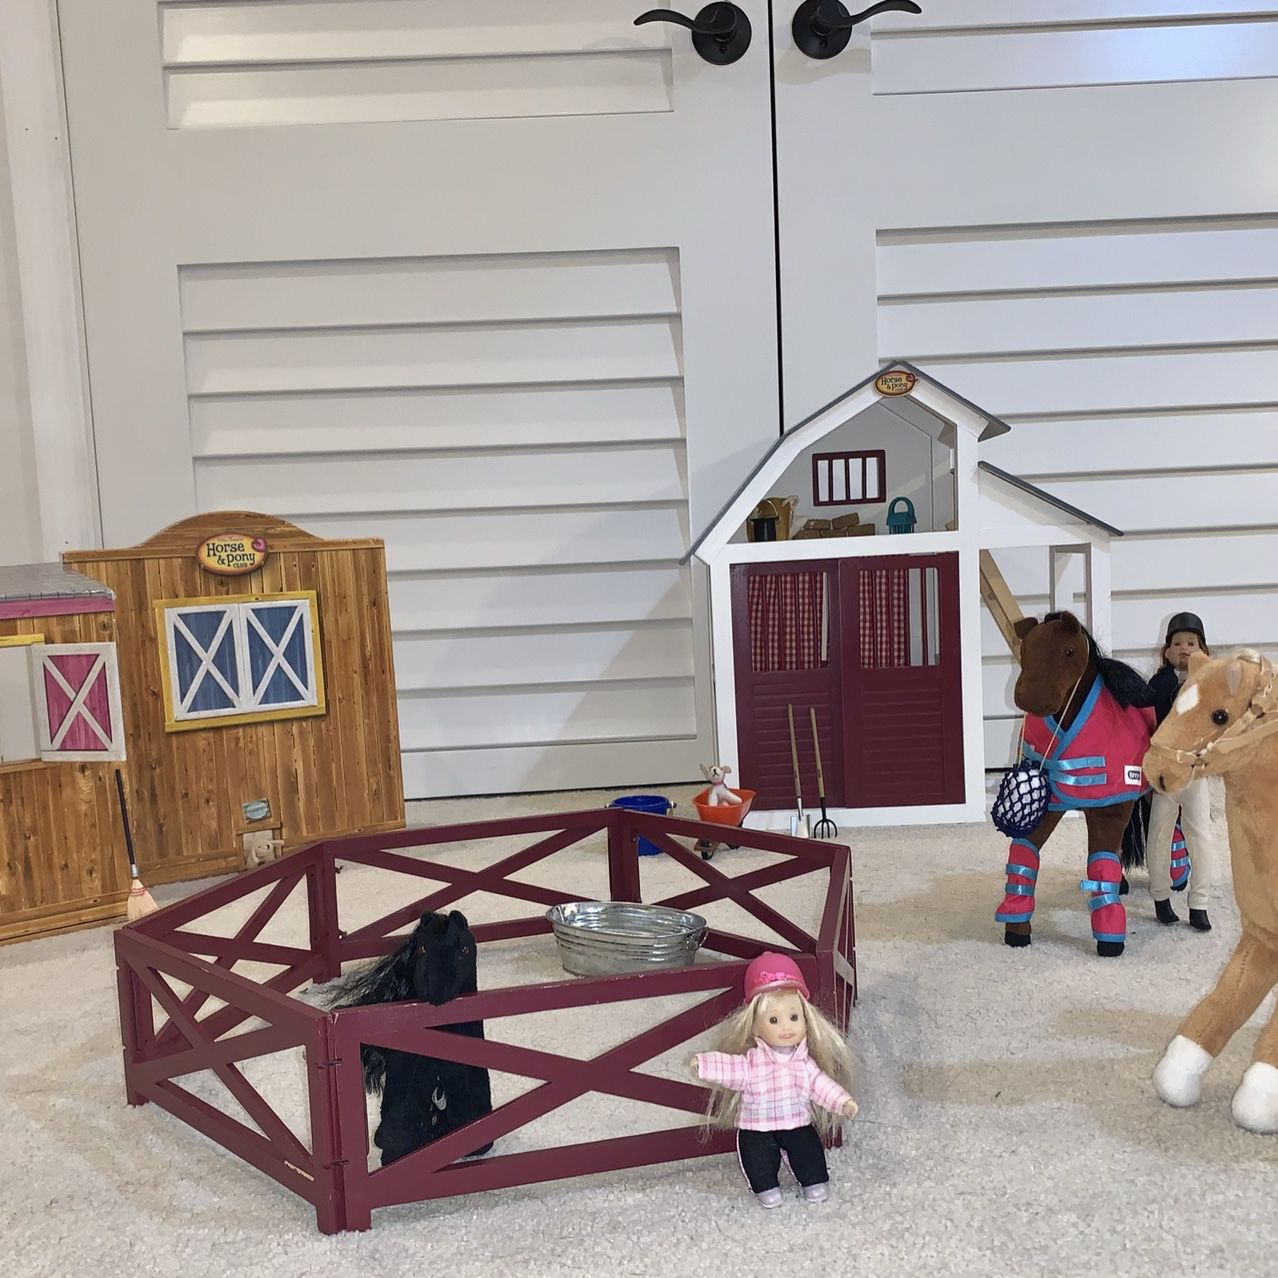 Wooden Horse Barn, Corral, Horses, Girls, Dogs, Tack, Feed Supplies & Tack Room